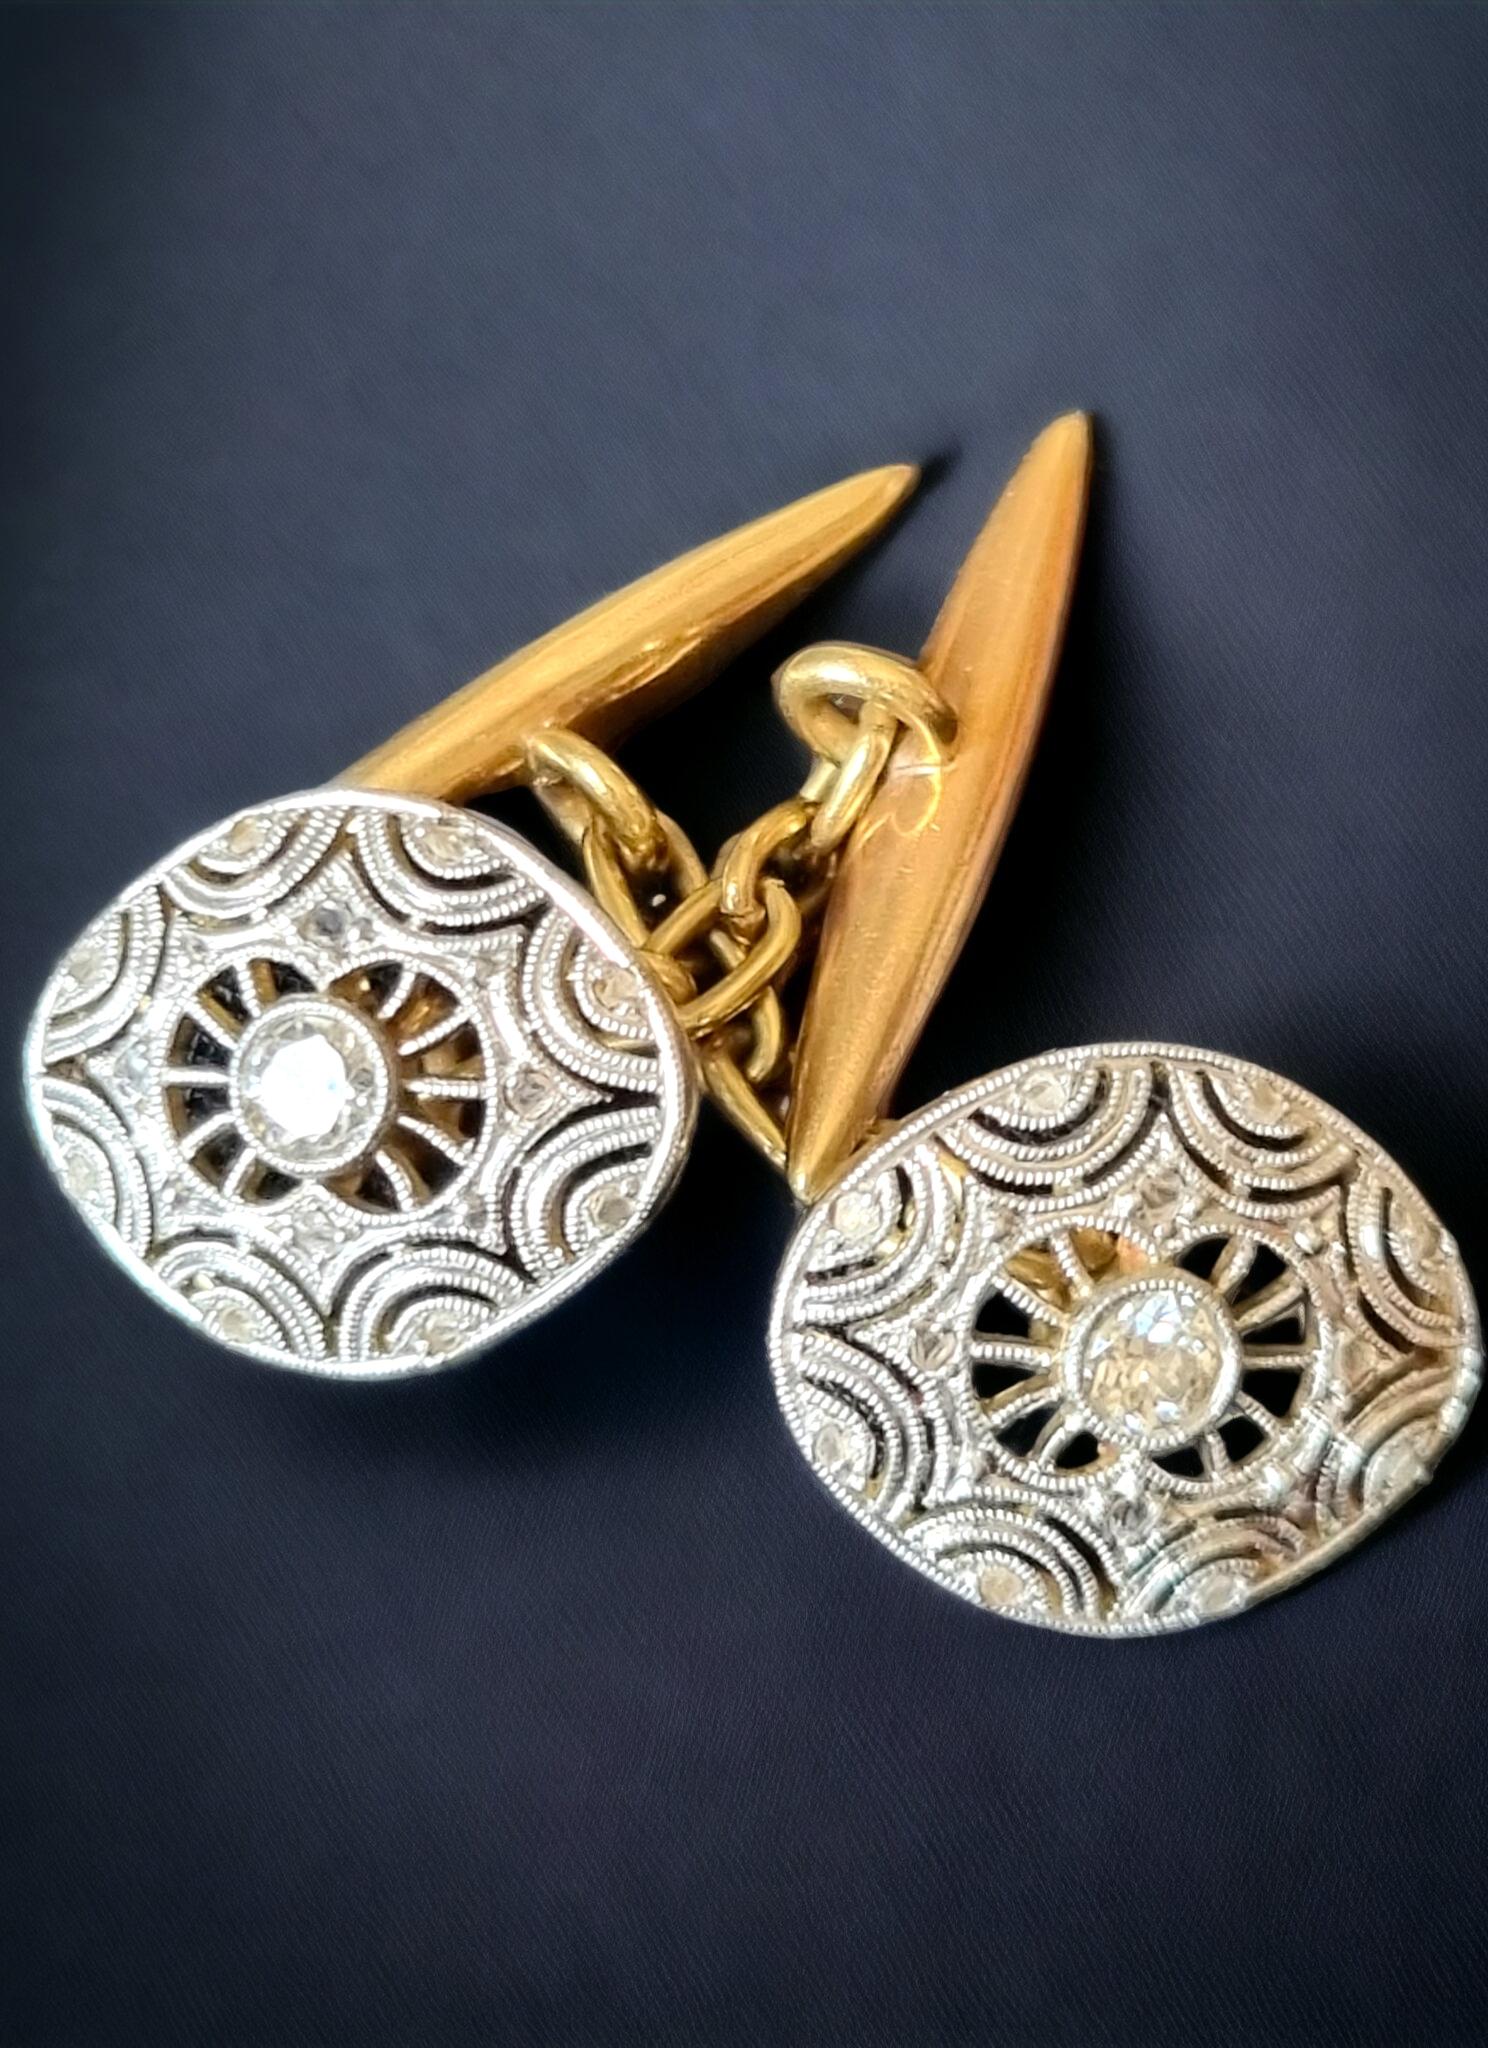 Edwardian Diamond Cufflinks in Platinum over 18 Karat Gold (Early 20th Century) In Good Condition For Sale In OVIEDO, AS